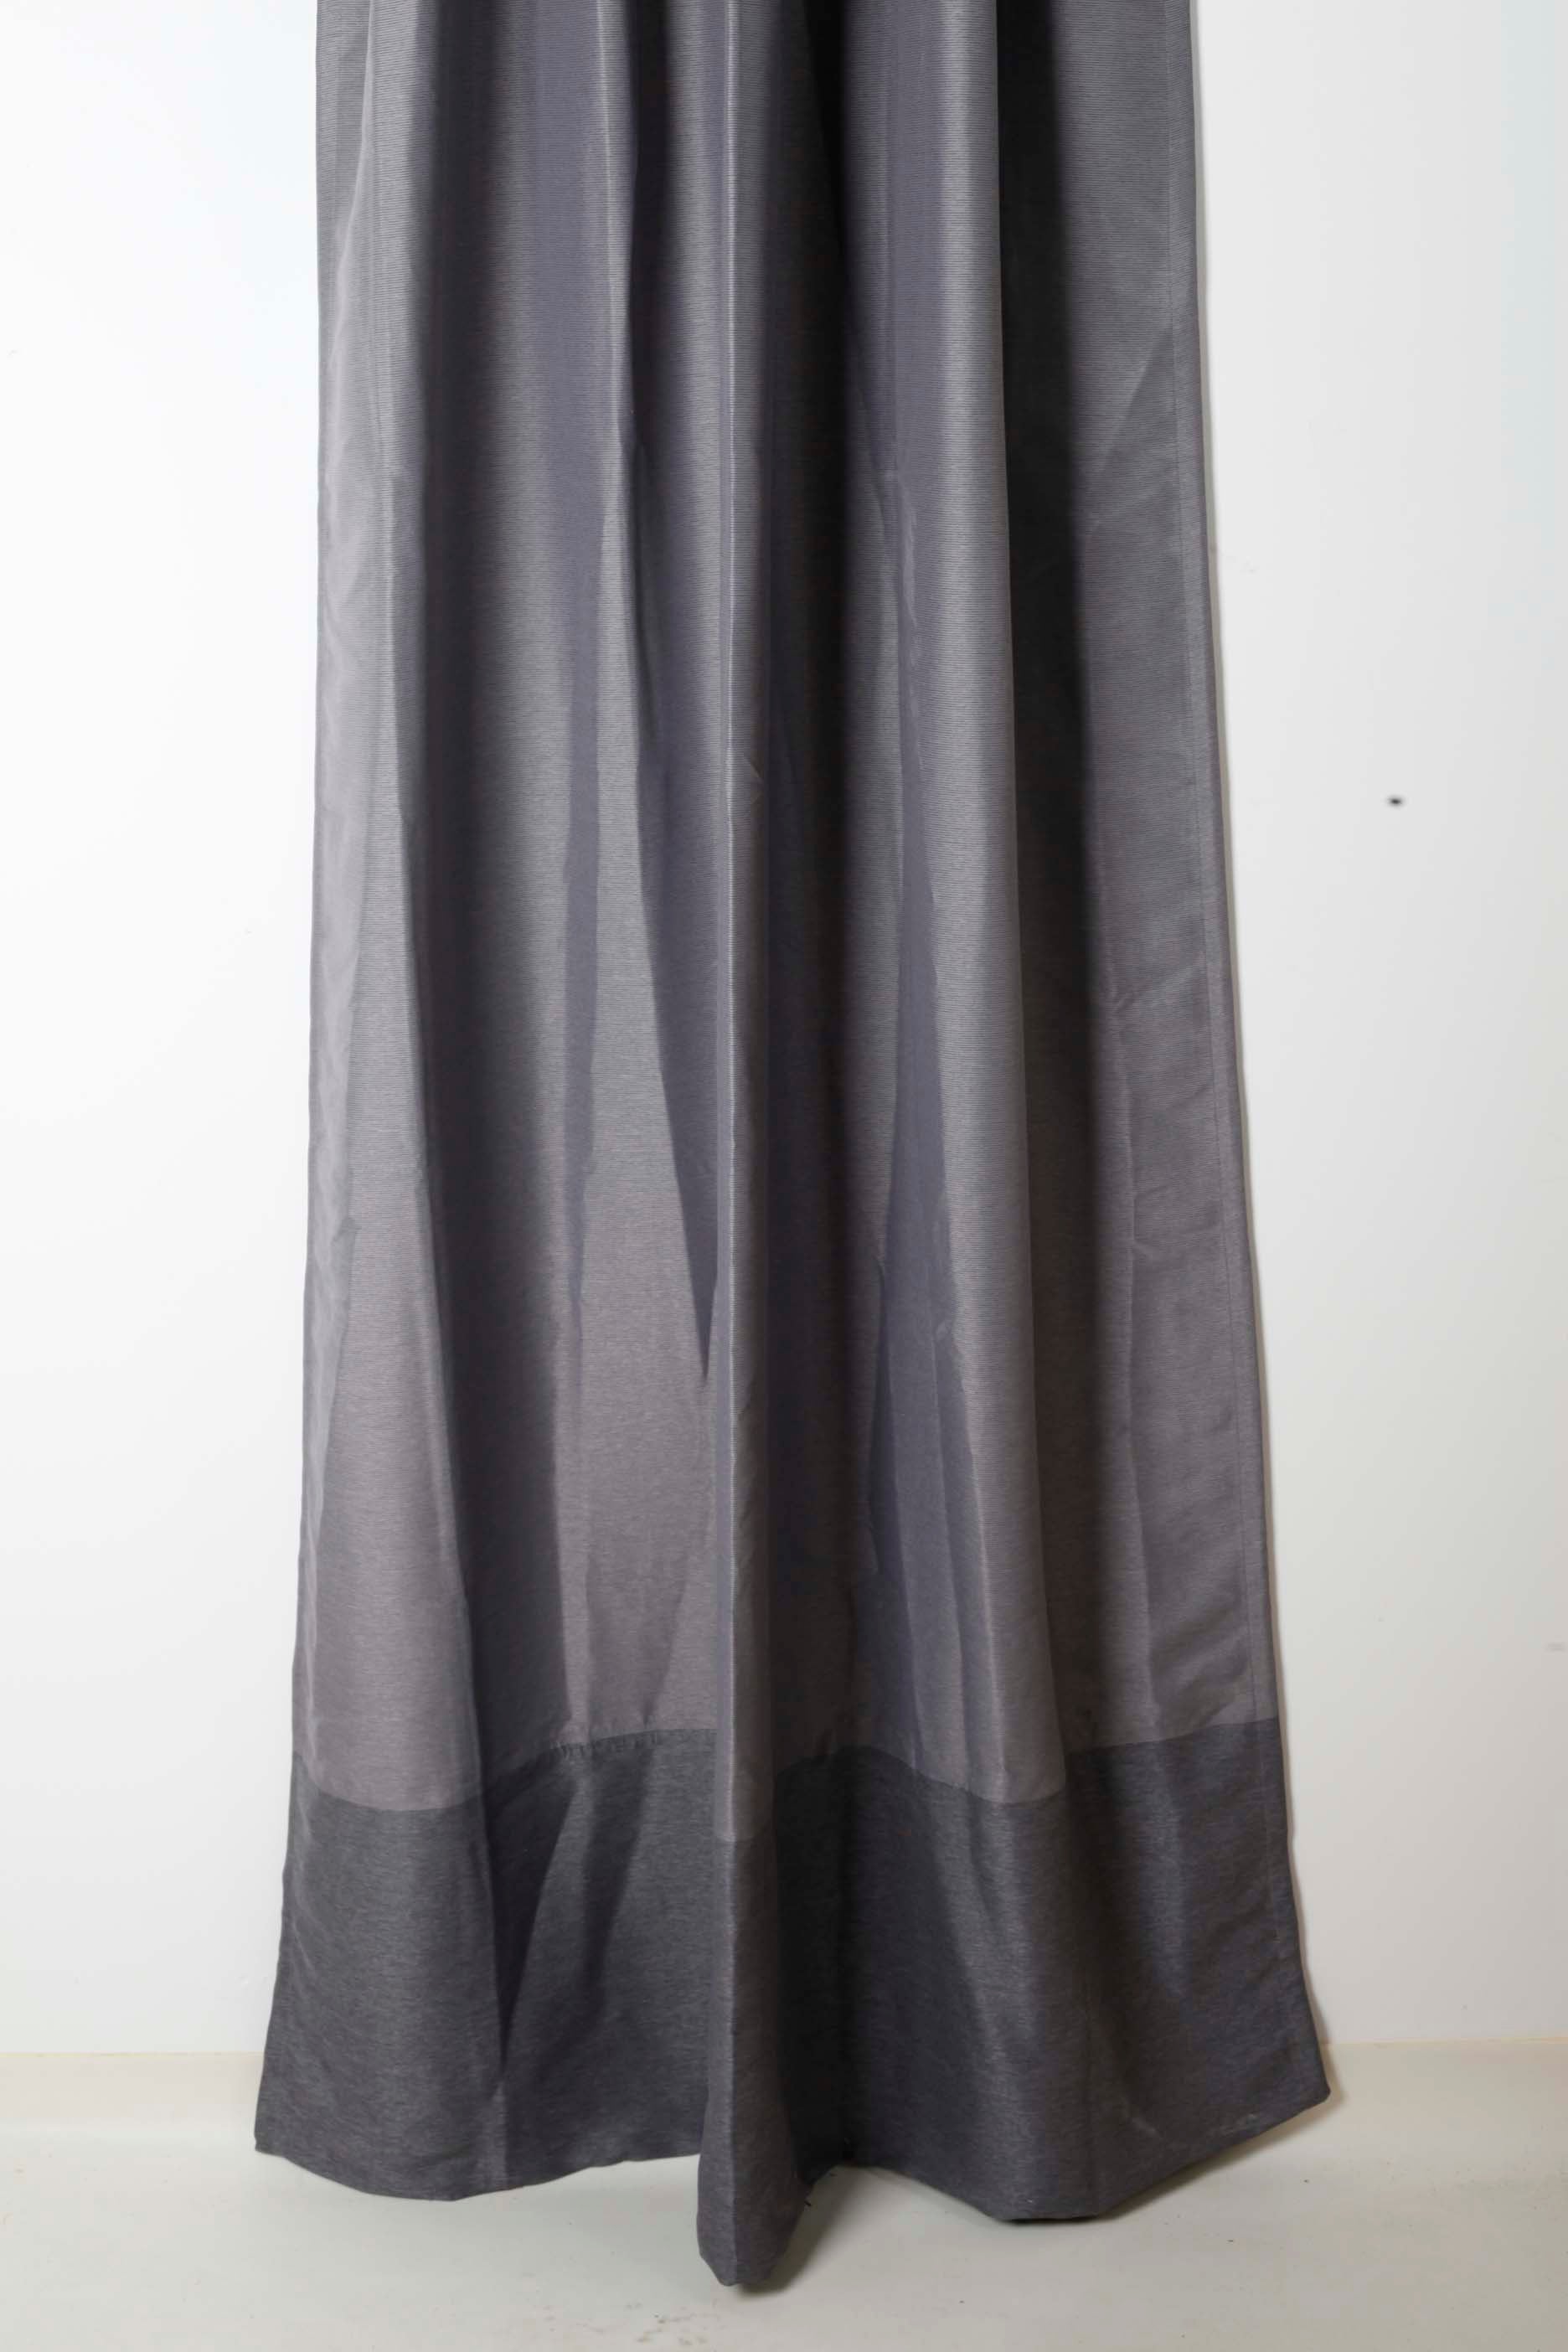 Grey Black-Out Curtain with Darker Panel